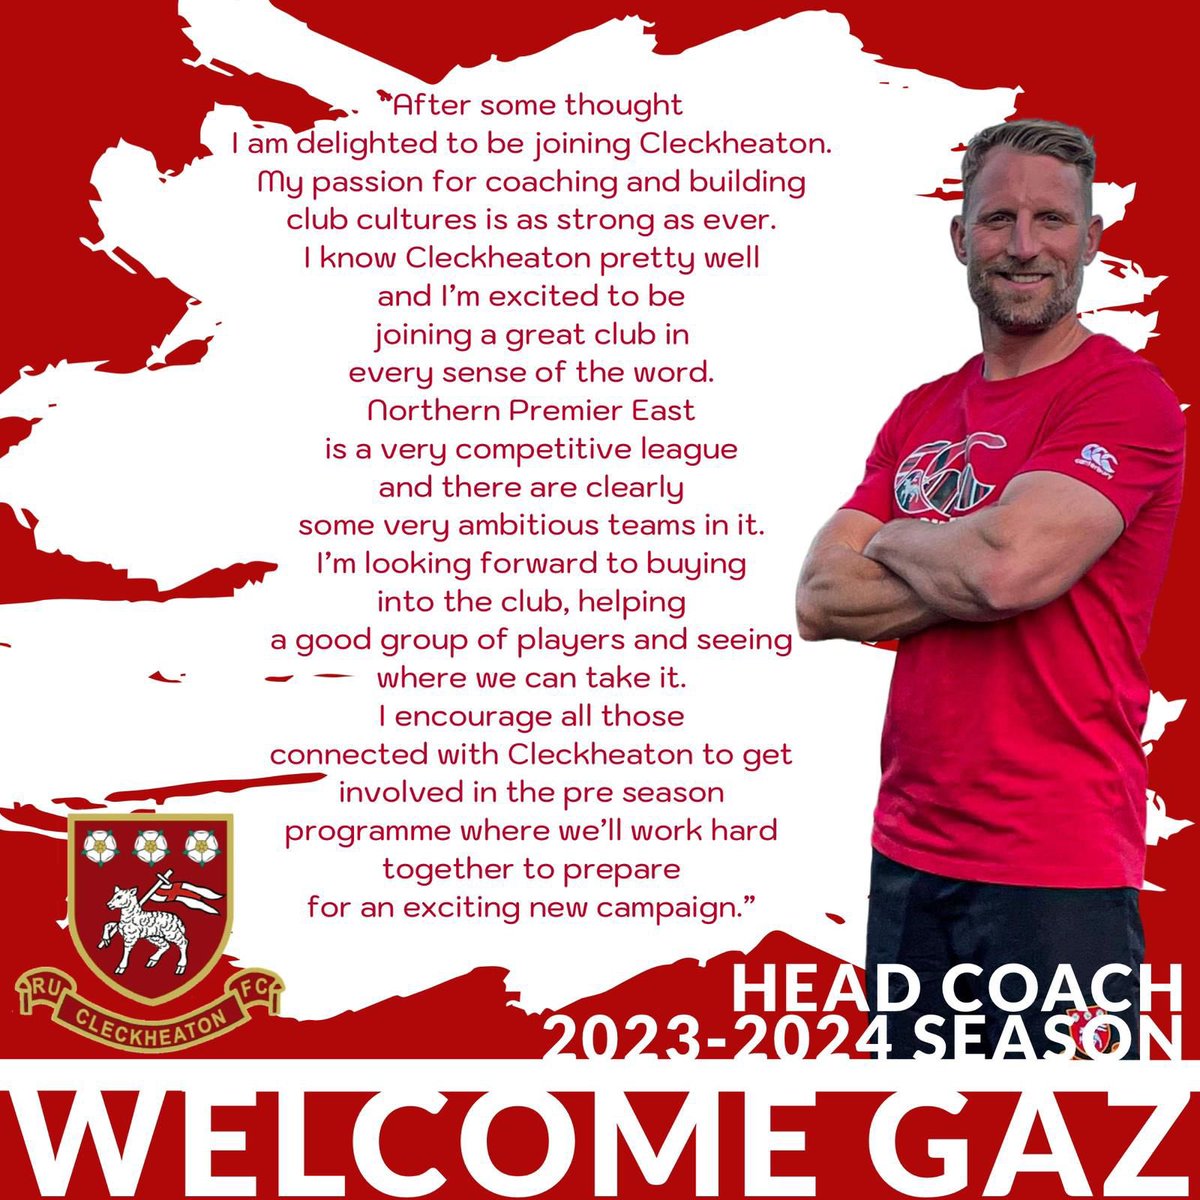 Preparations for the 23/24 campaign have begun & we are extremely pleased to announce that we’ve appointed Gareth Lewis to be head coach next season. 

Attracting someone like Gaz with his National league experience is huge and we are looking forward to an exciting season 🔴⚪️